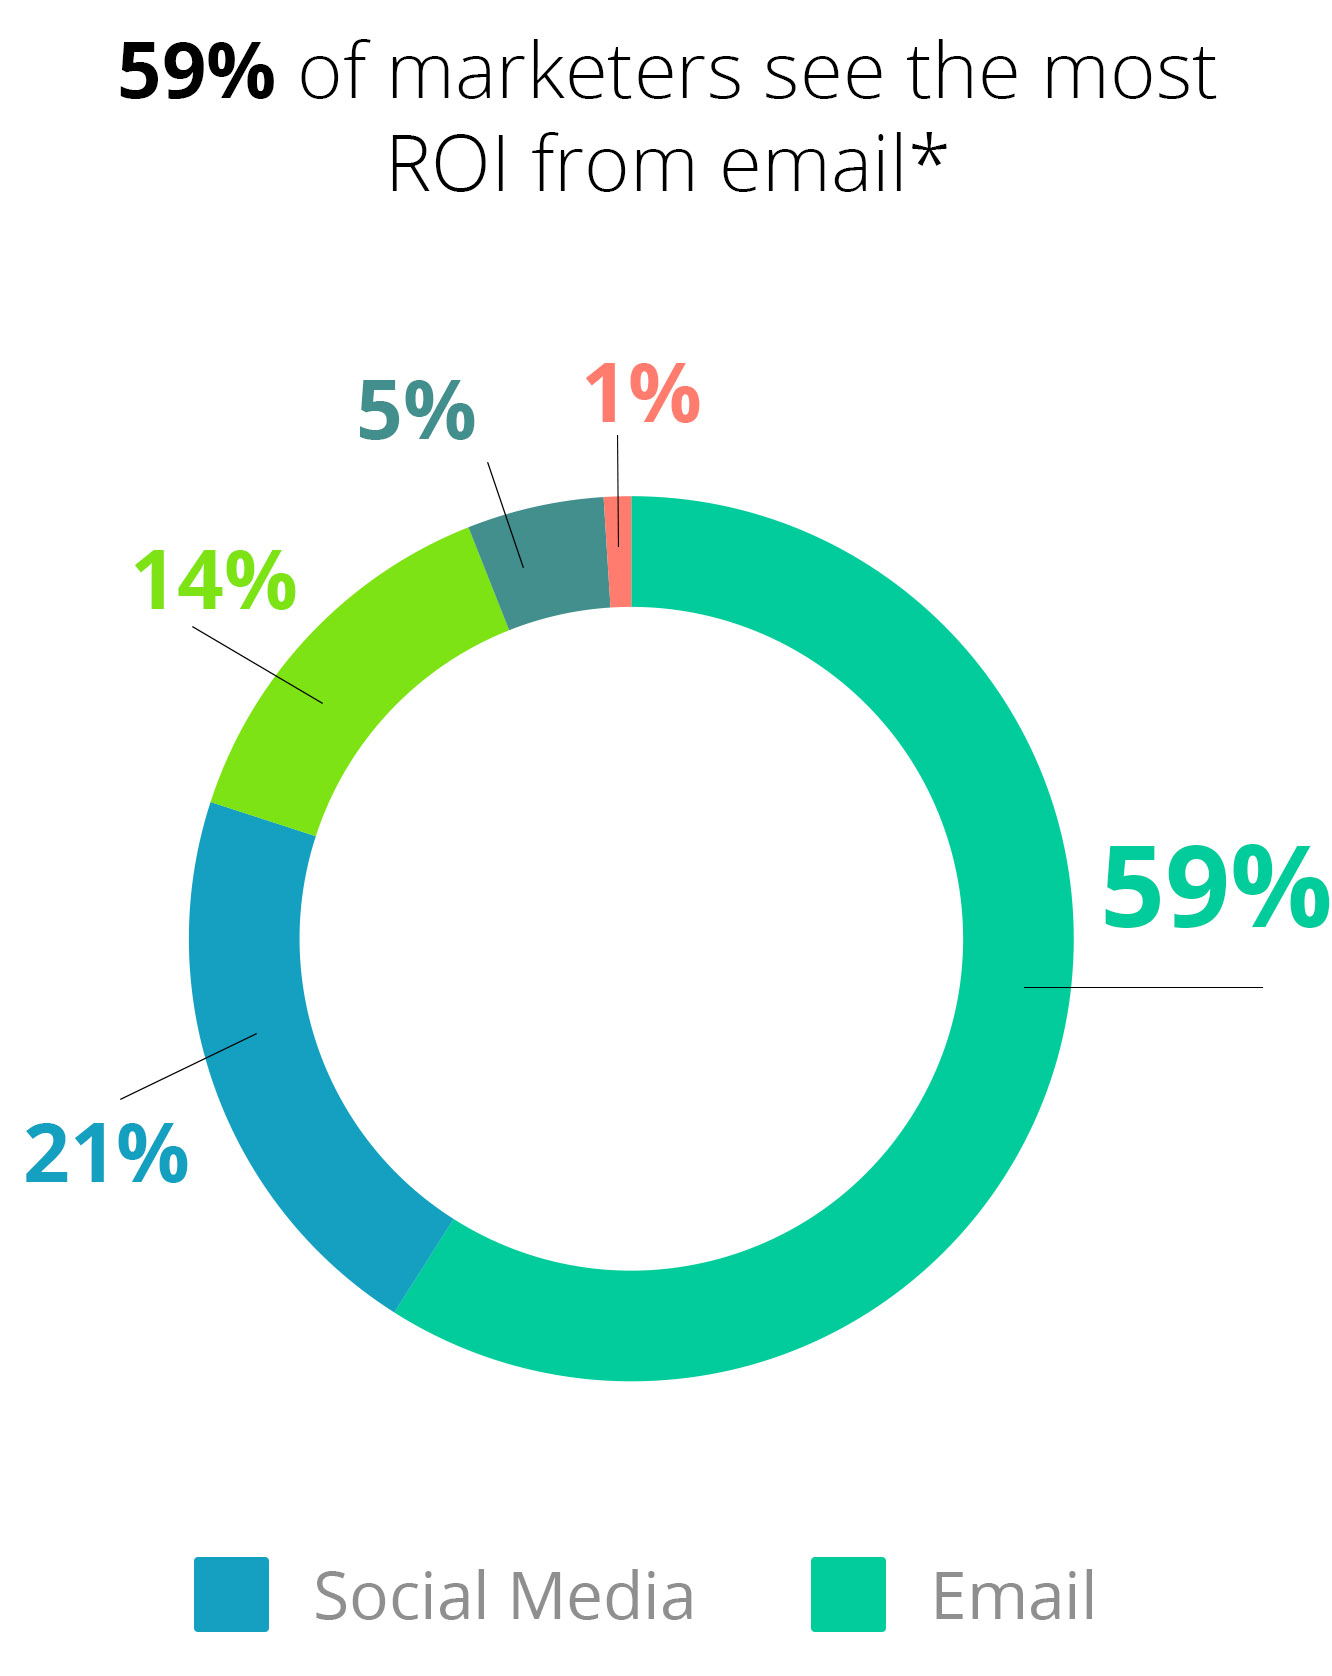 59% of marketers see the most ROI from email*